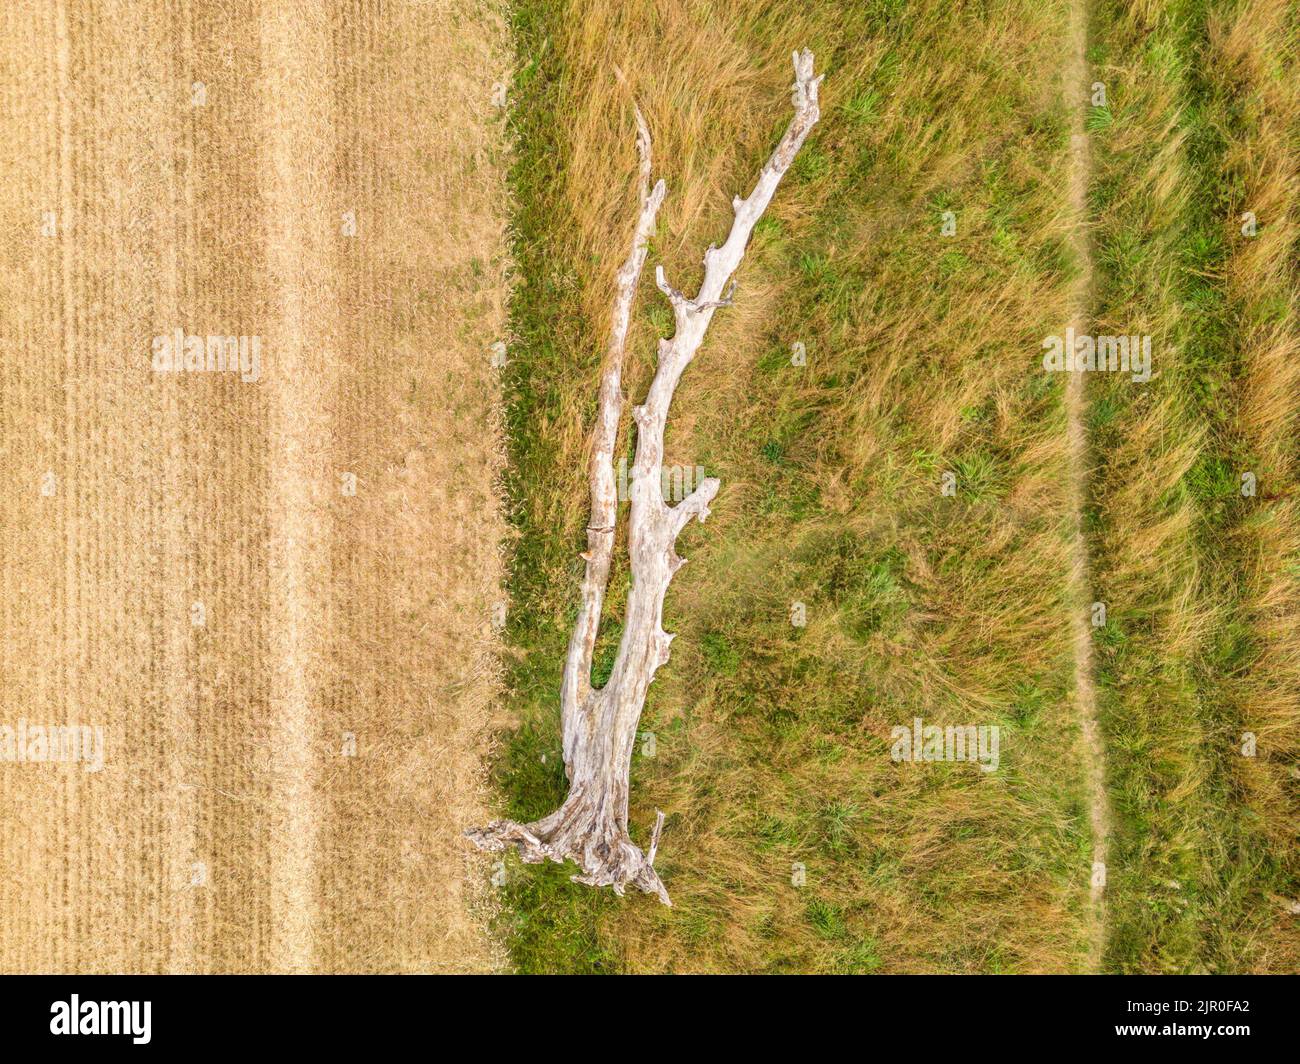 Aerial landscape view of dead fallen tree lying in a field bordering an agricultural crop field. Stock Photo